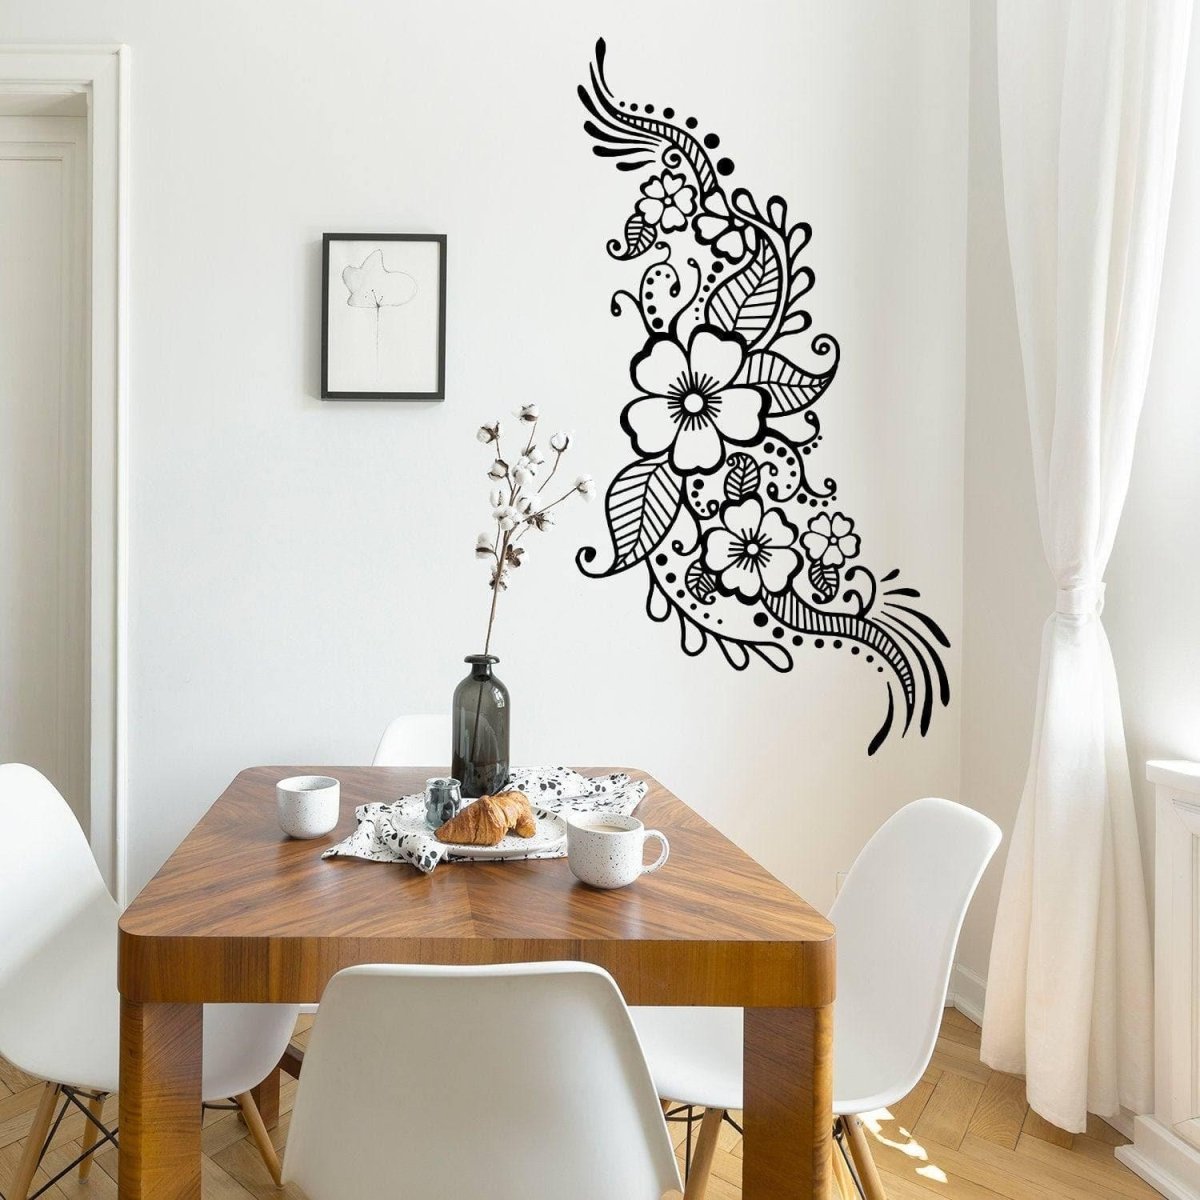 60+ Ways To Create A Zen And Divine Ambiance In Your Home With WallDesign's  Spiritual Wall Stickers – WallDesign